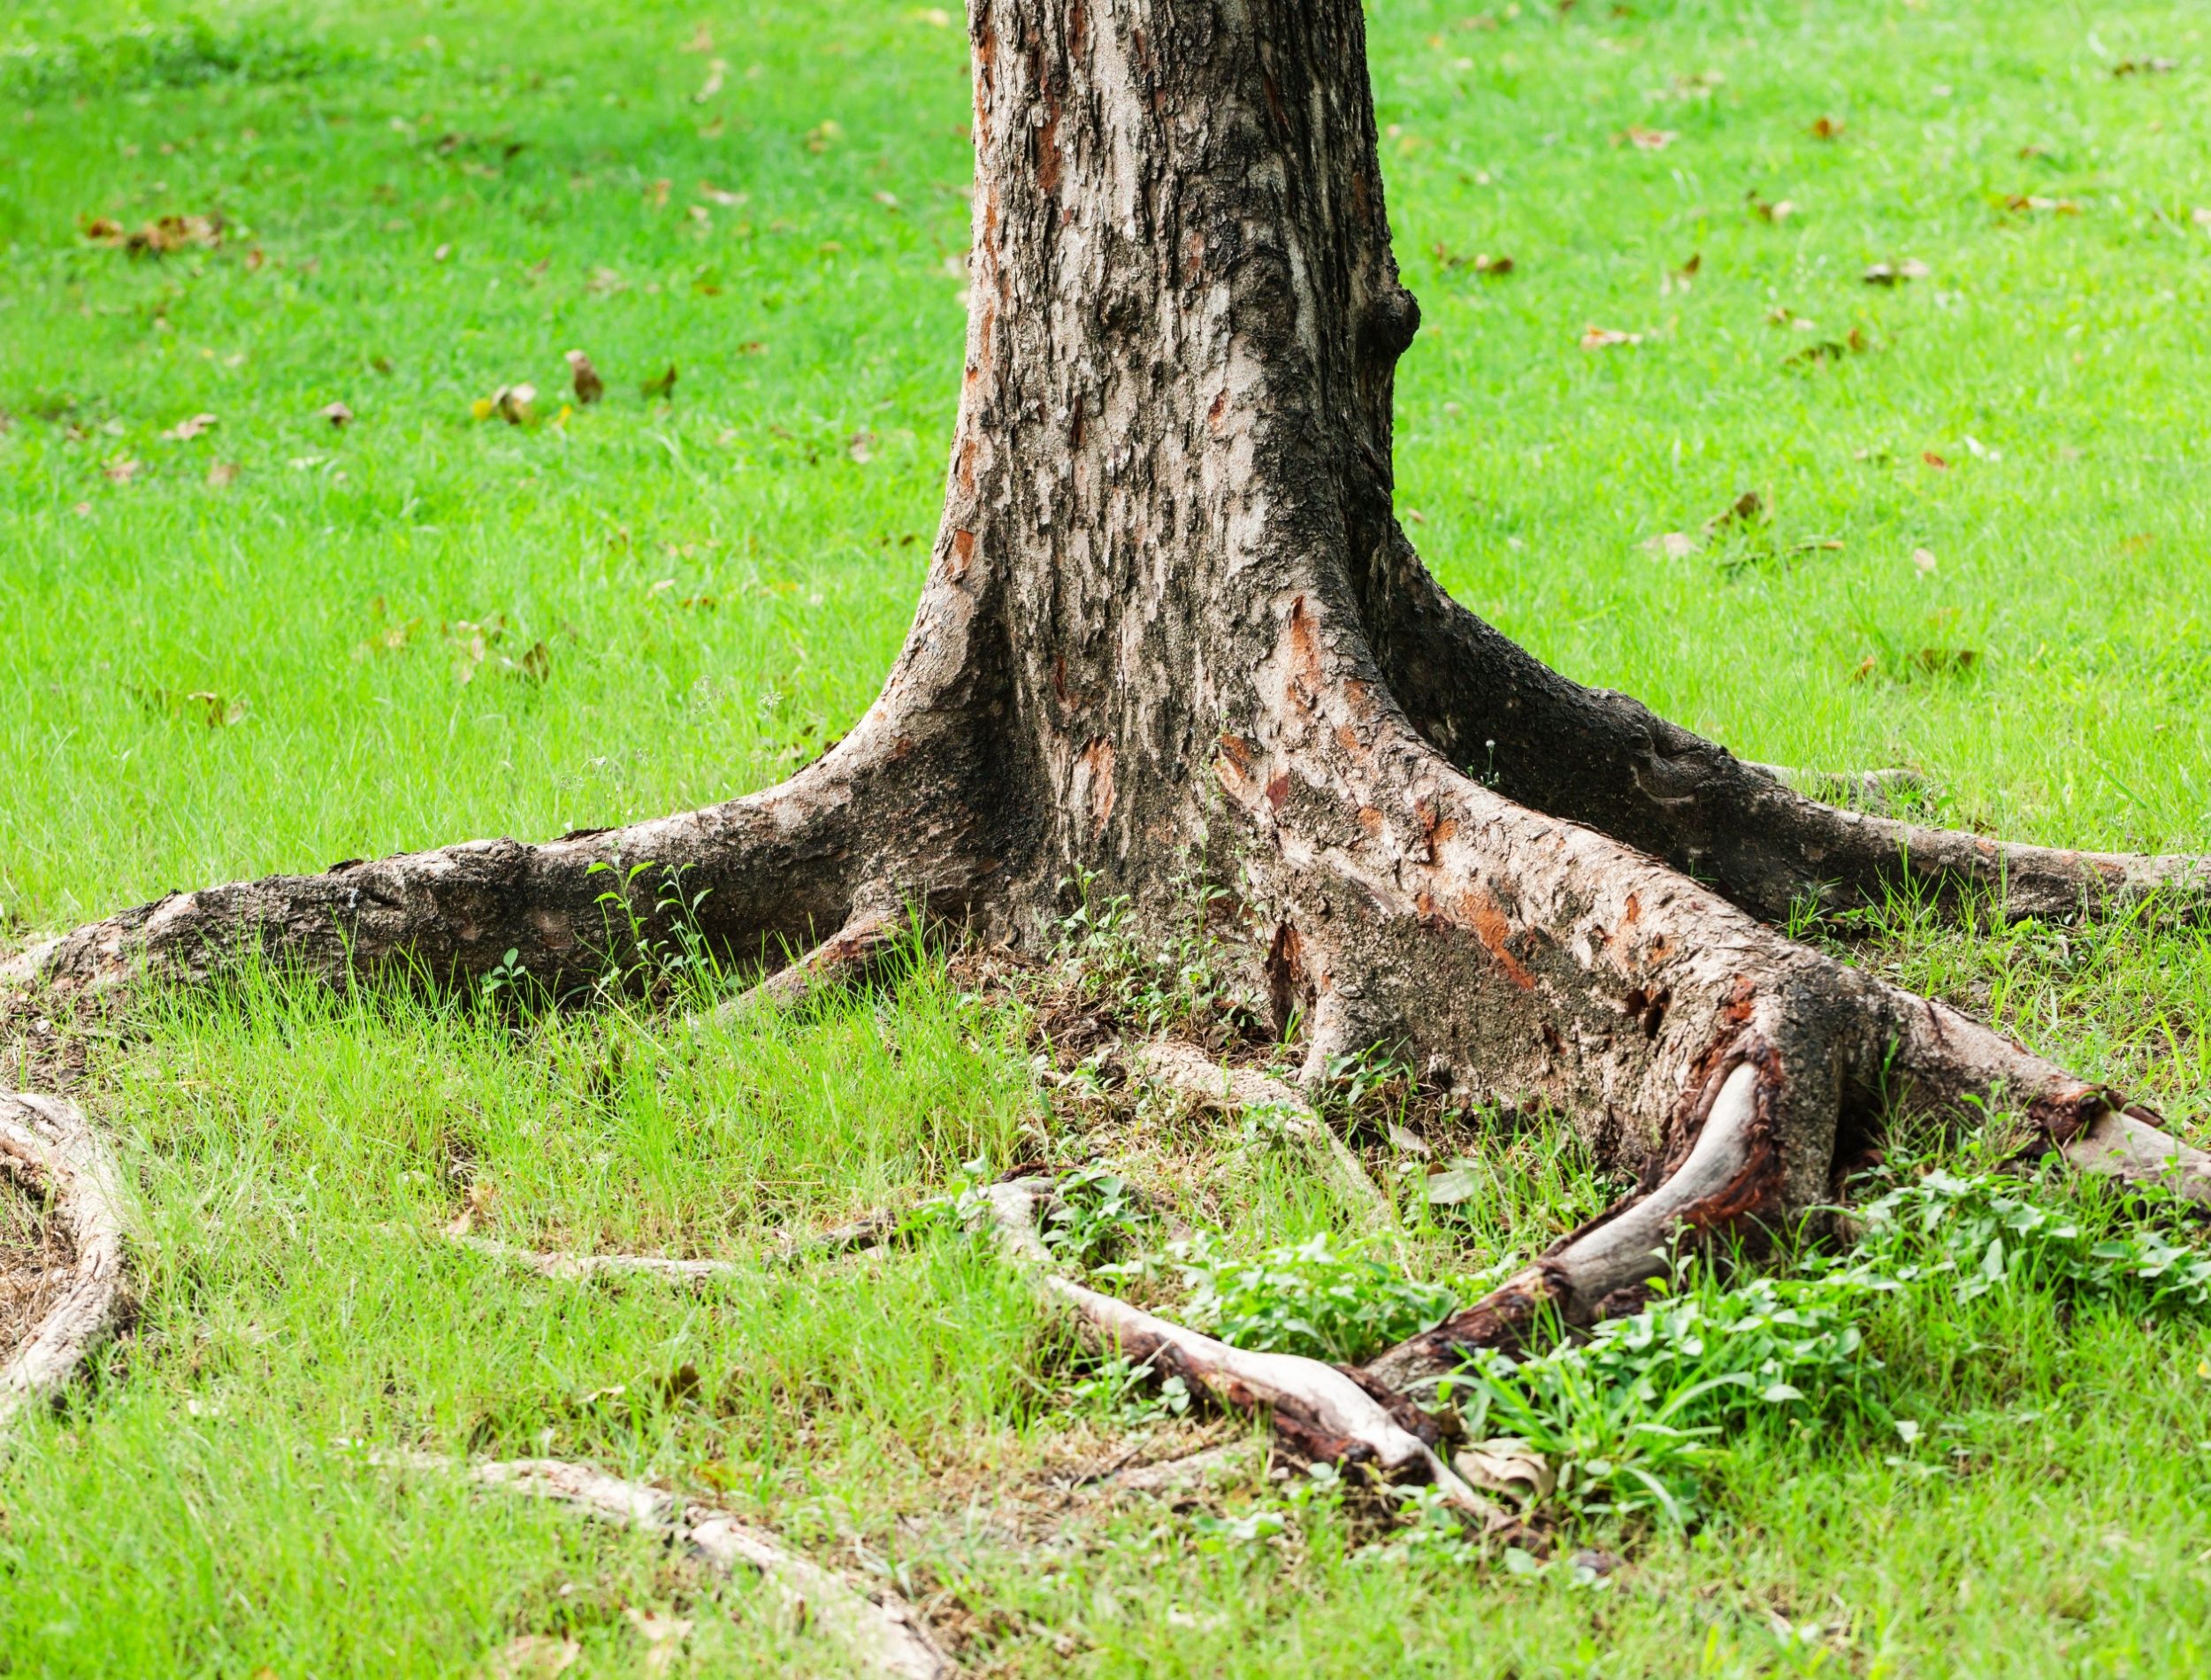 Exposed tree roots on a lush green lawn